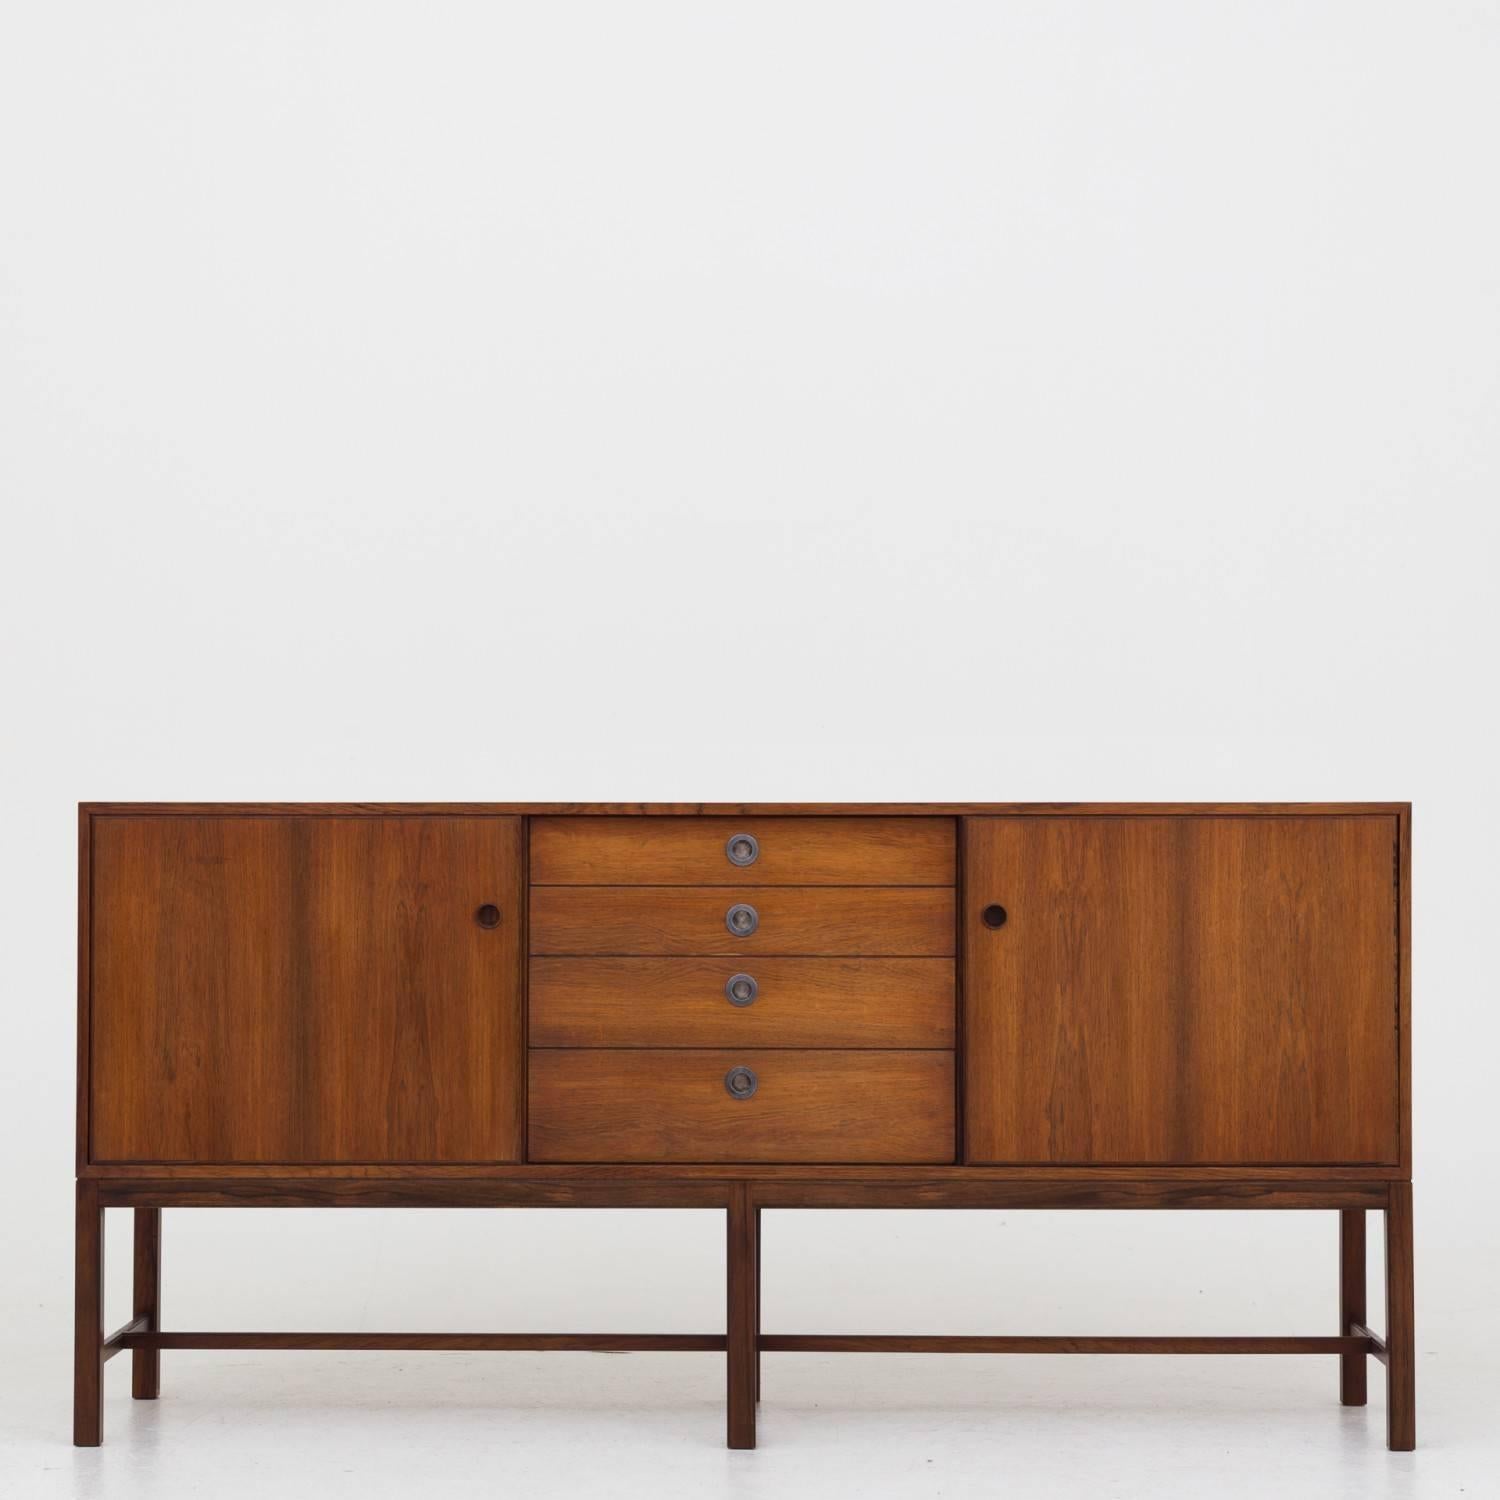 Sideboard in rosewood by Danish cabinetmaker, front with four drawers and metal handles.
 